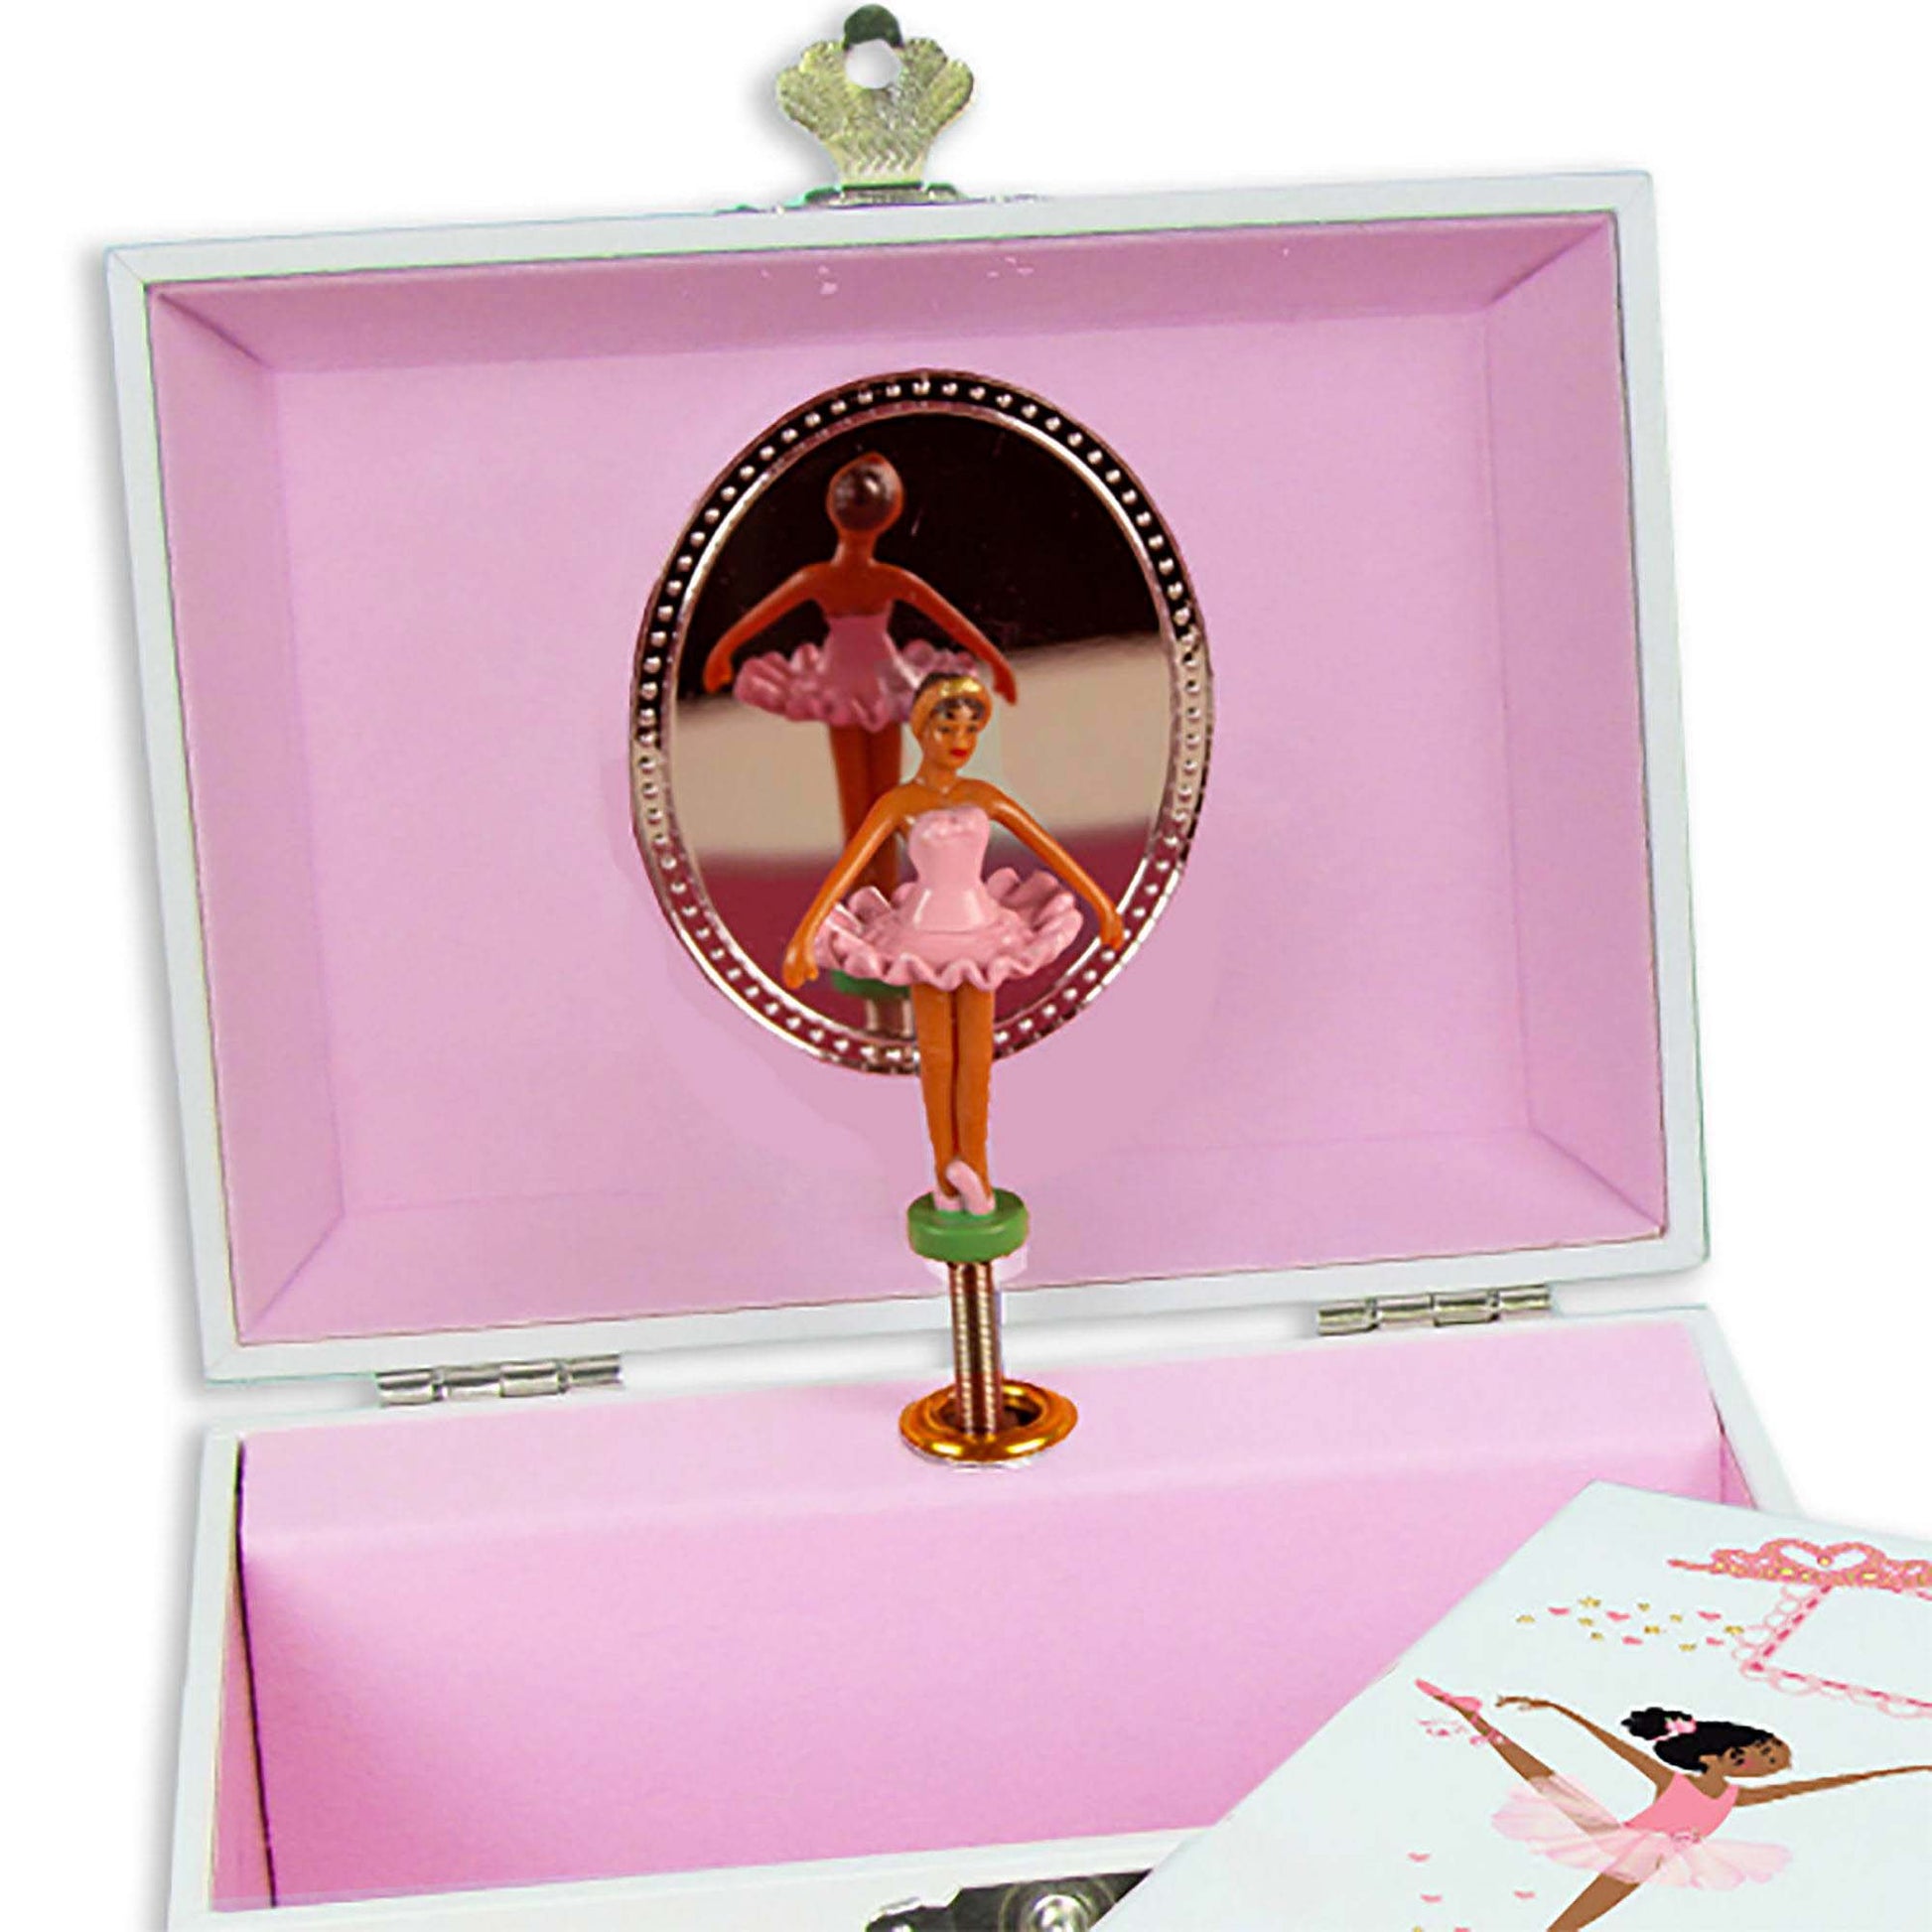 Personalized Ballerina Jewelry Box with Lacey Bow design